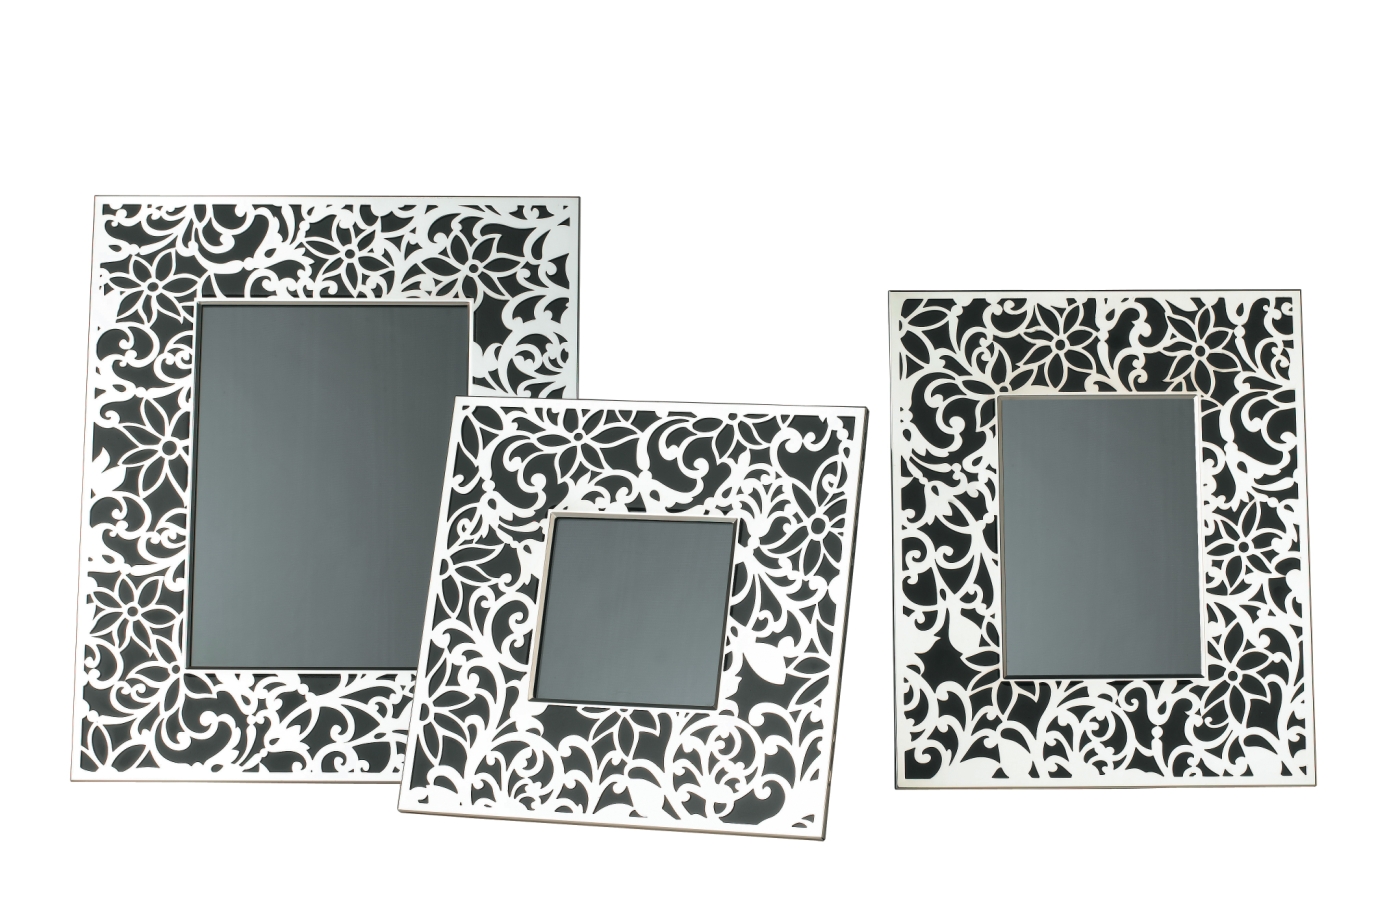 Picture frame in silver plated - Ercuis